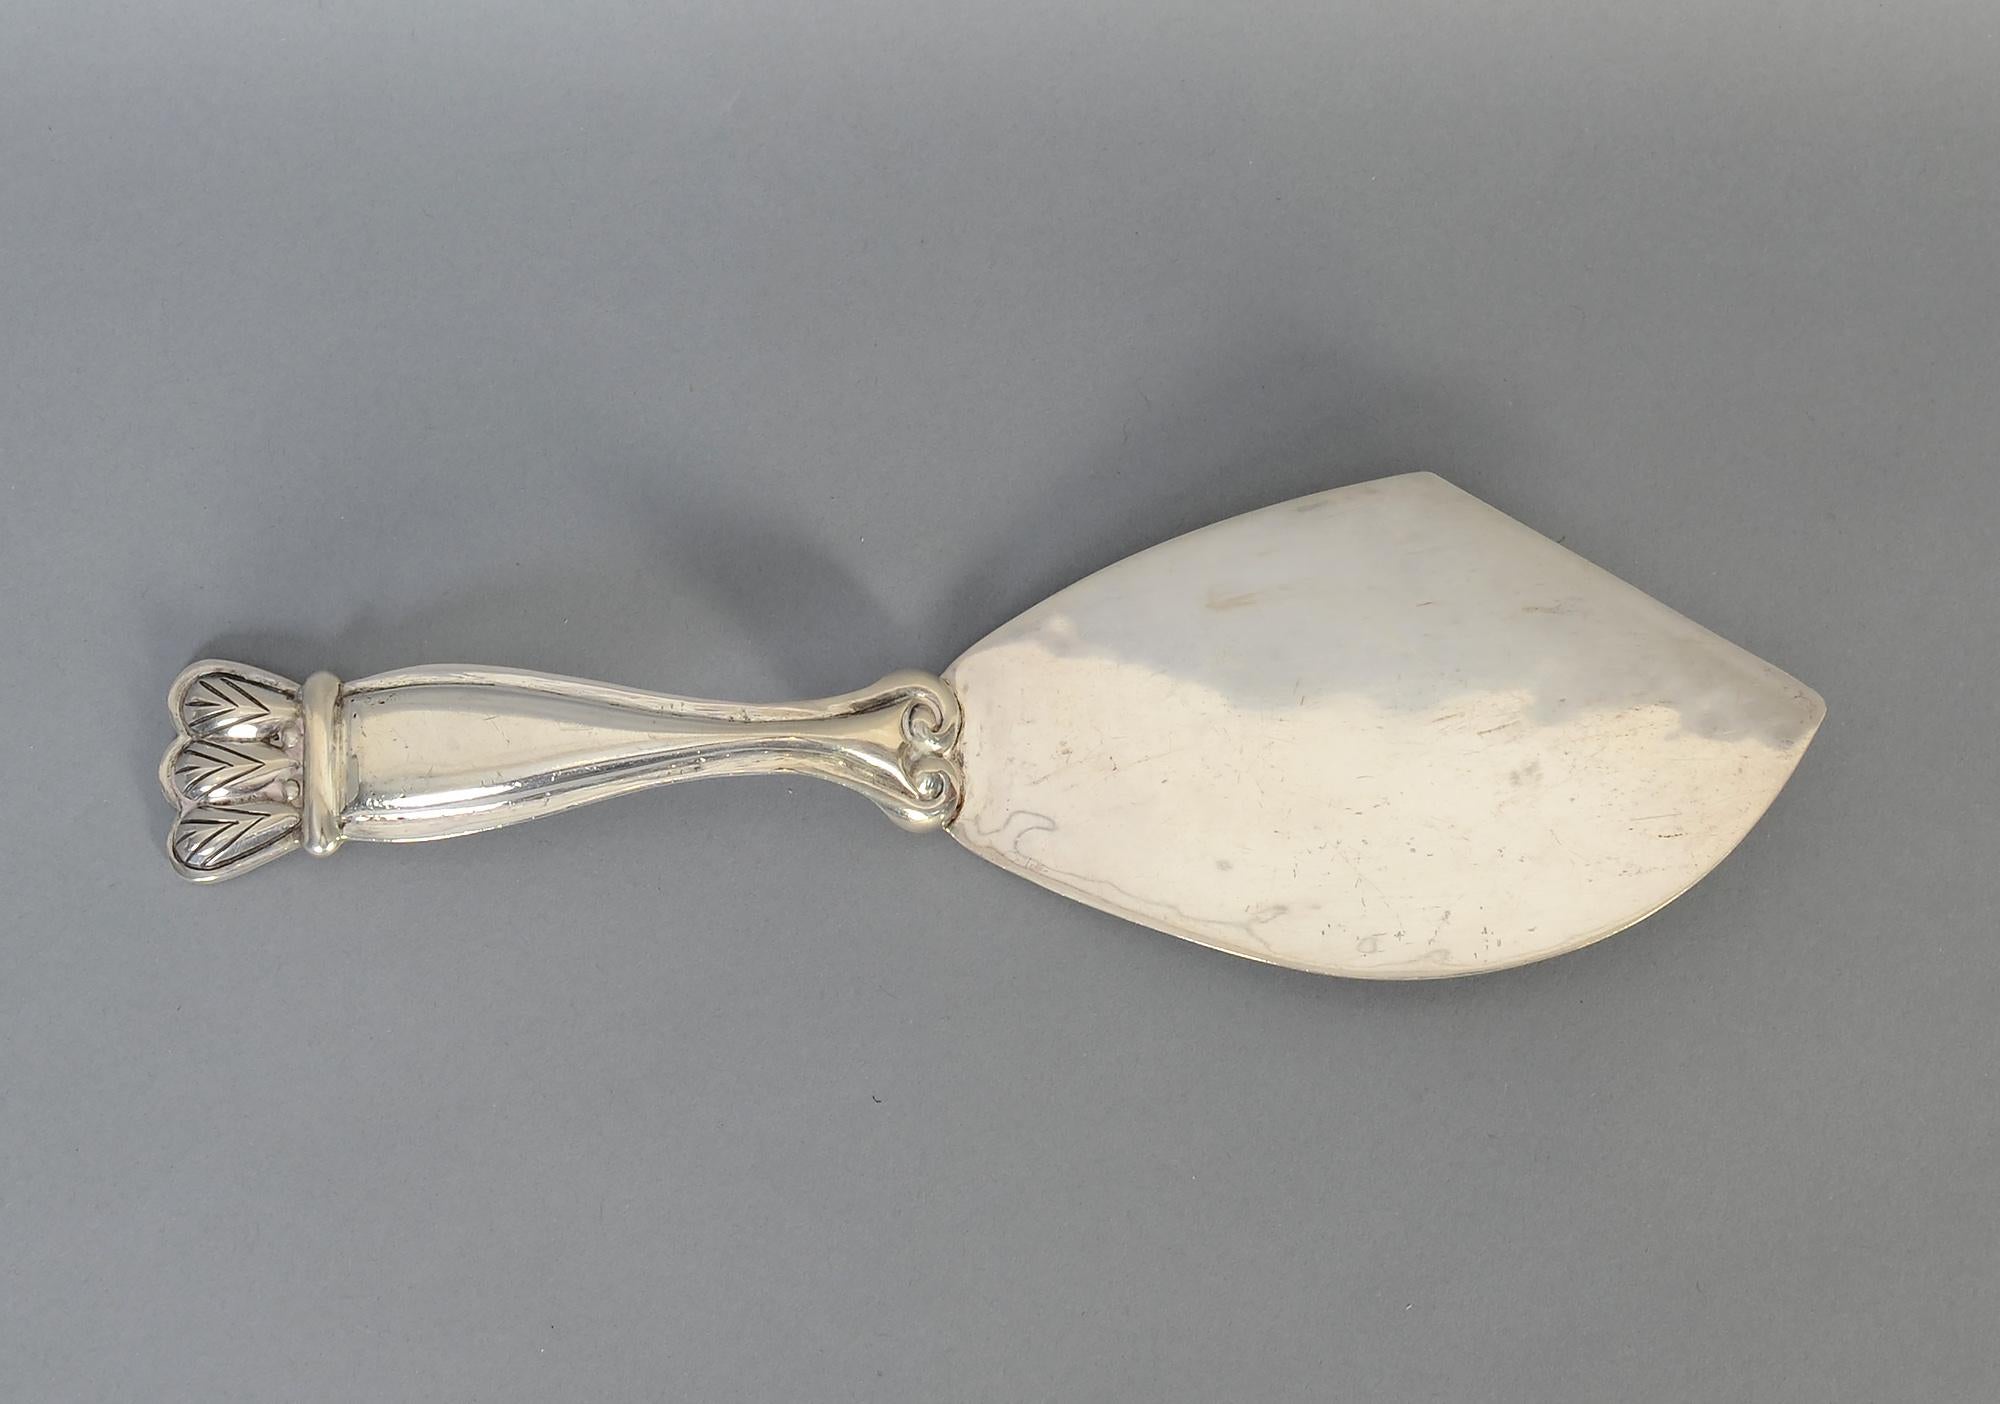 
Elegant and most unusual pie server by Hector Aguilar. The server measures 10 1/4 inches in length and 3 1/4